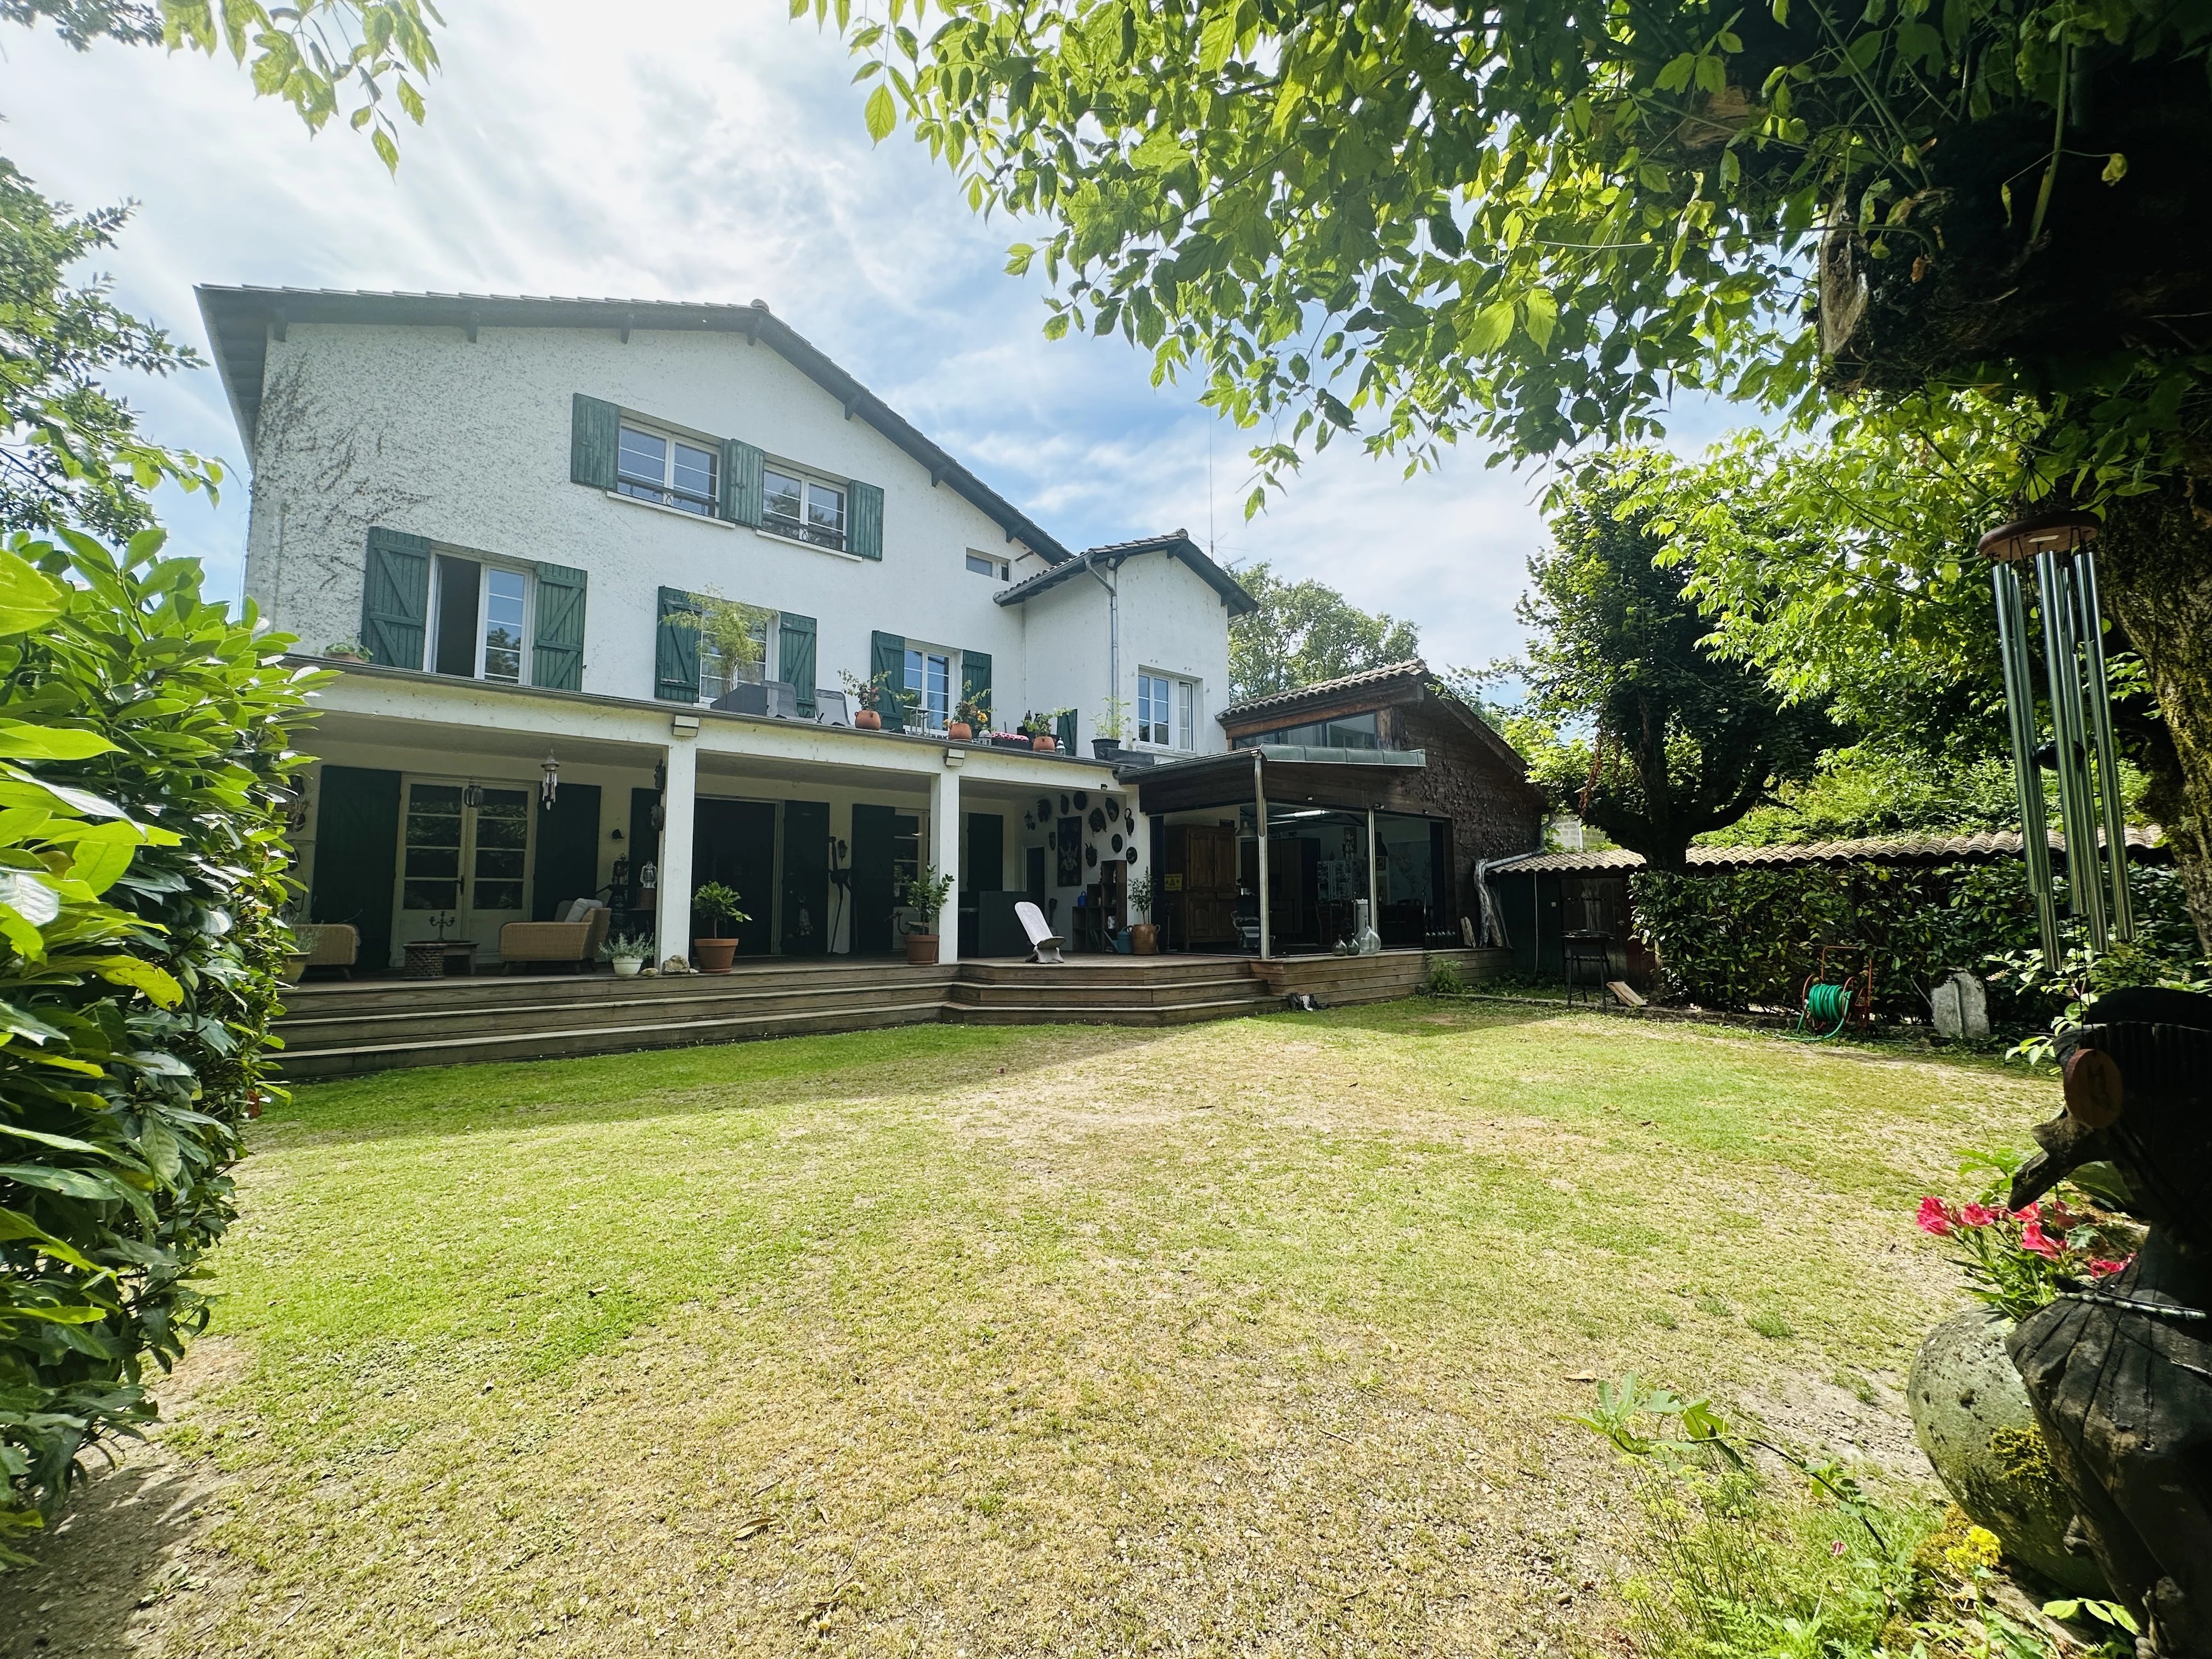 8-bedroom property in landscaped grounds with pool, chalet/guest house, outbuildings and river access